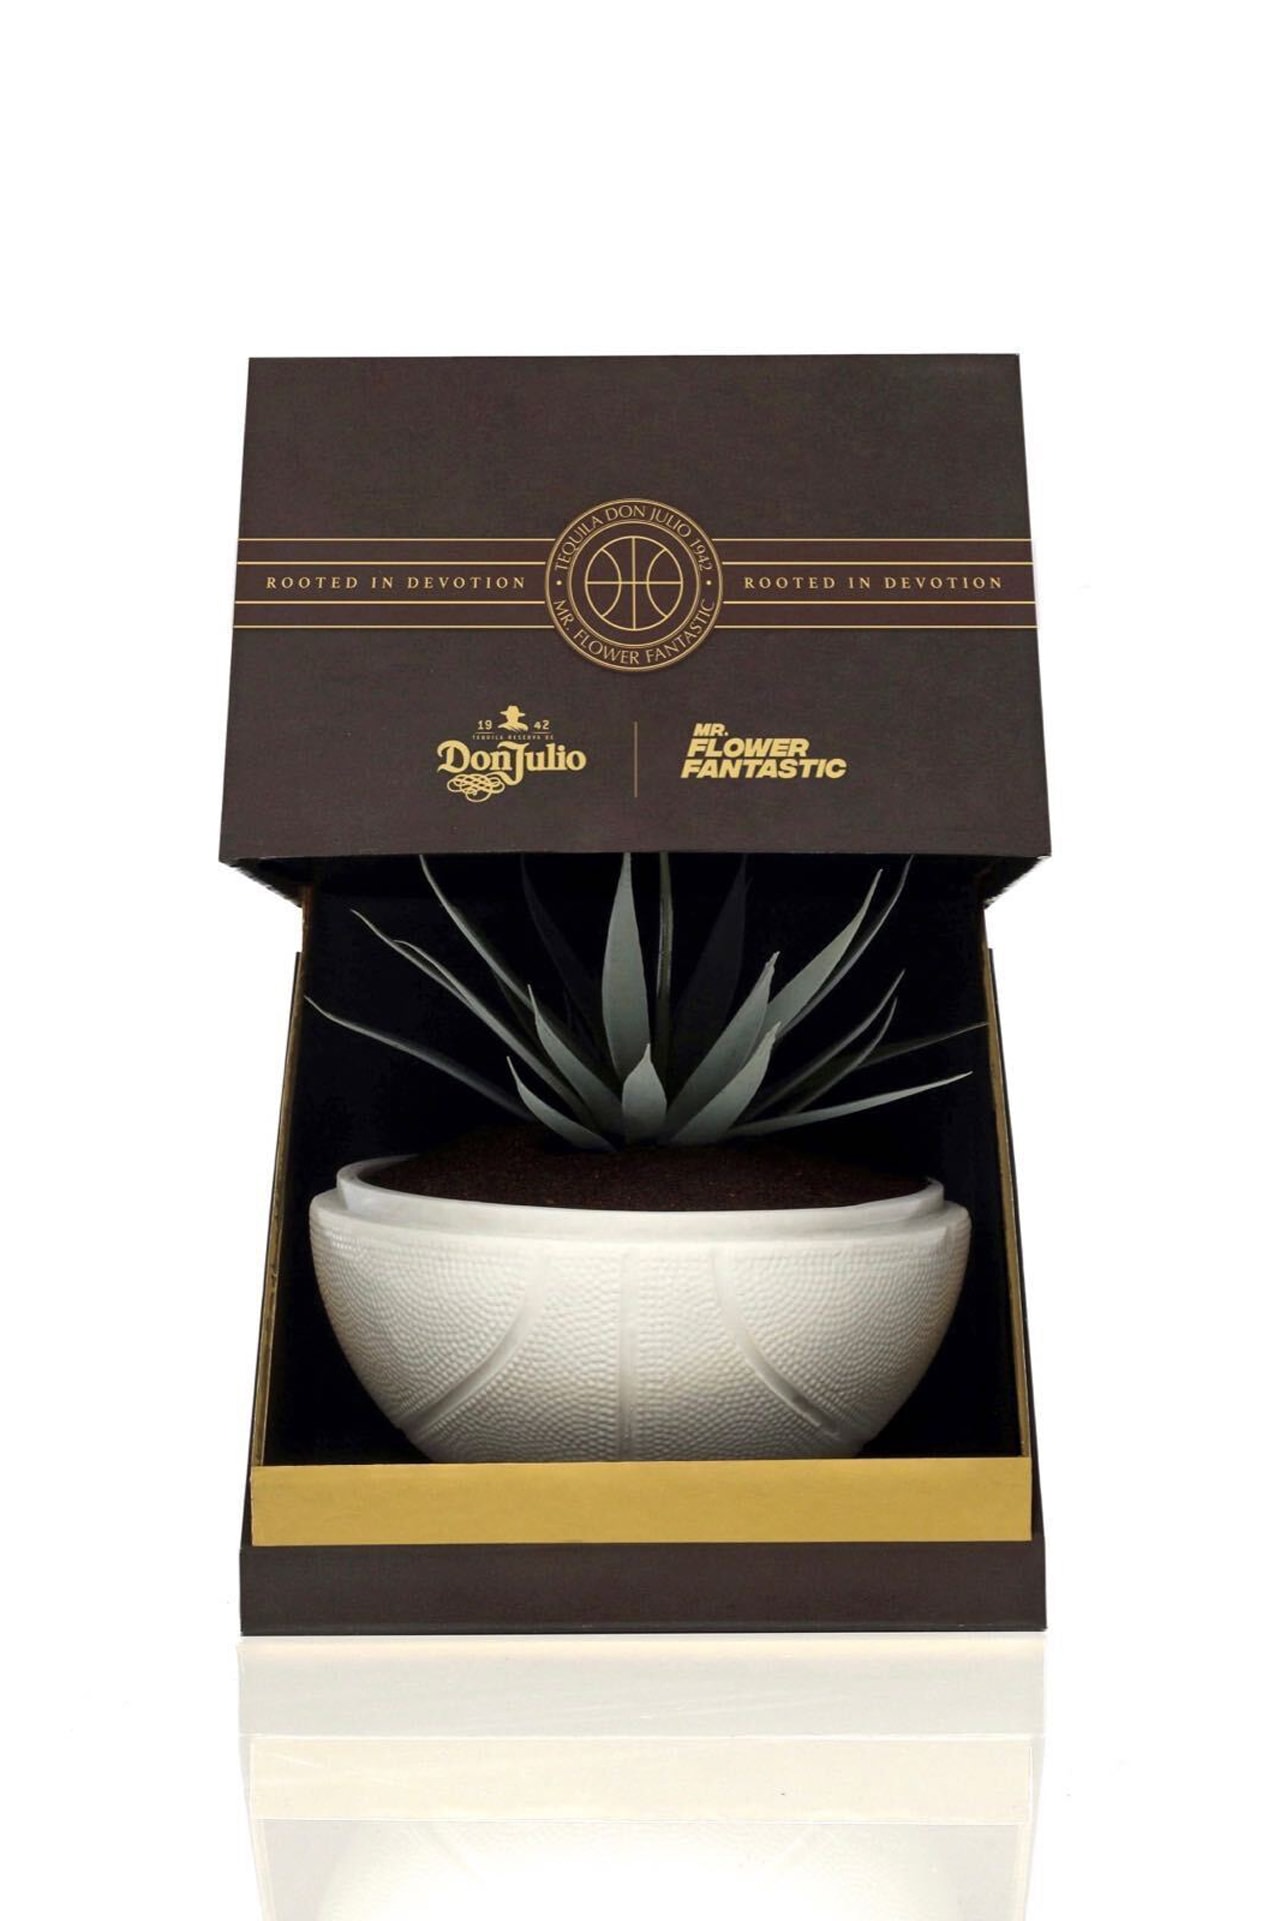 synthetic placement plant bilingual planting instructions in both English and Spanish, a certificate of authenticity custom designed protective housing encasement Tequila Don Julio 1942 packaging NBA creative community agave planter